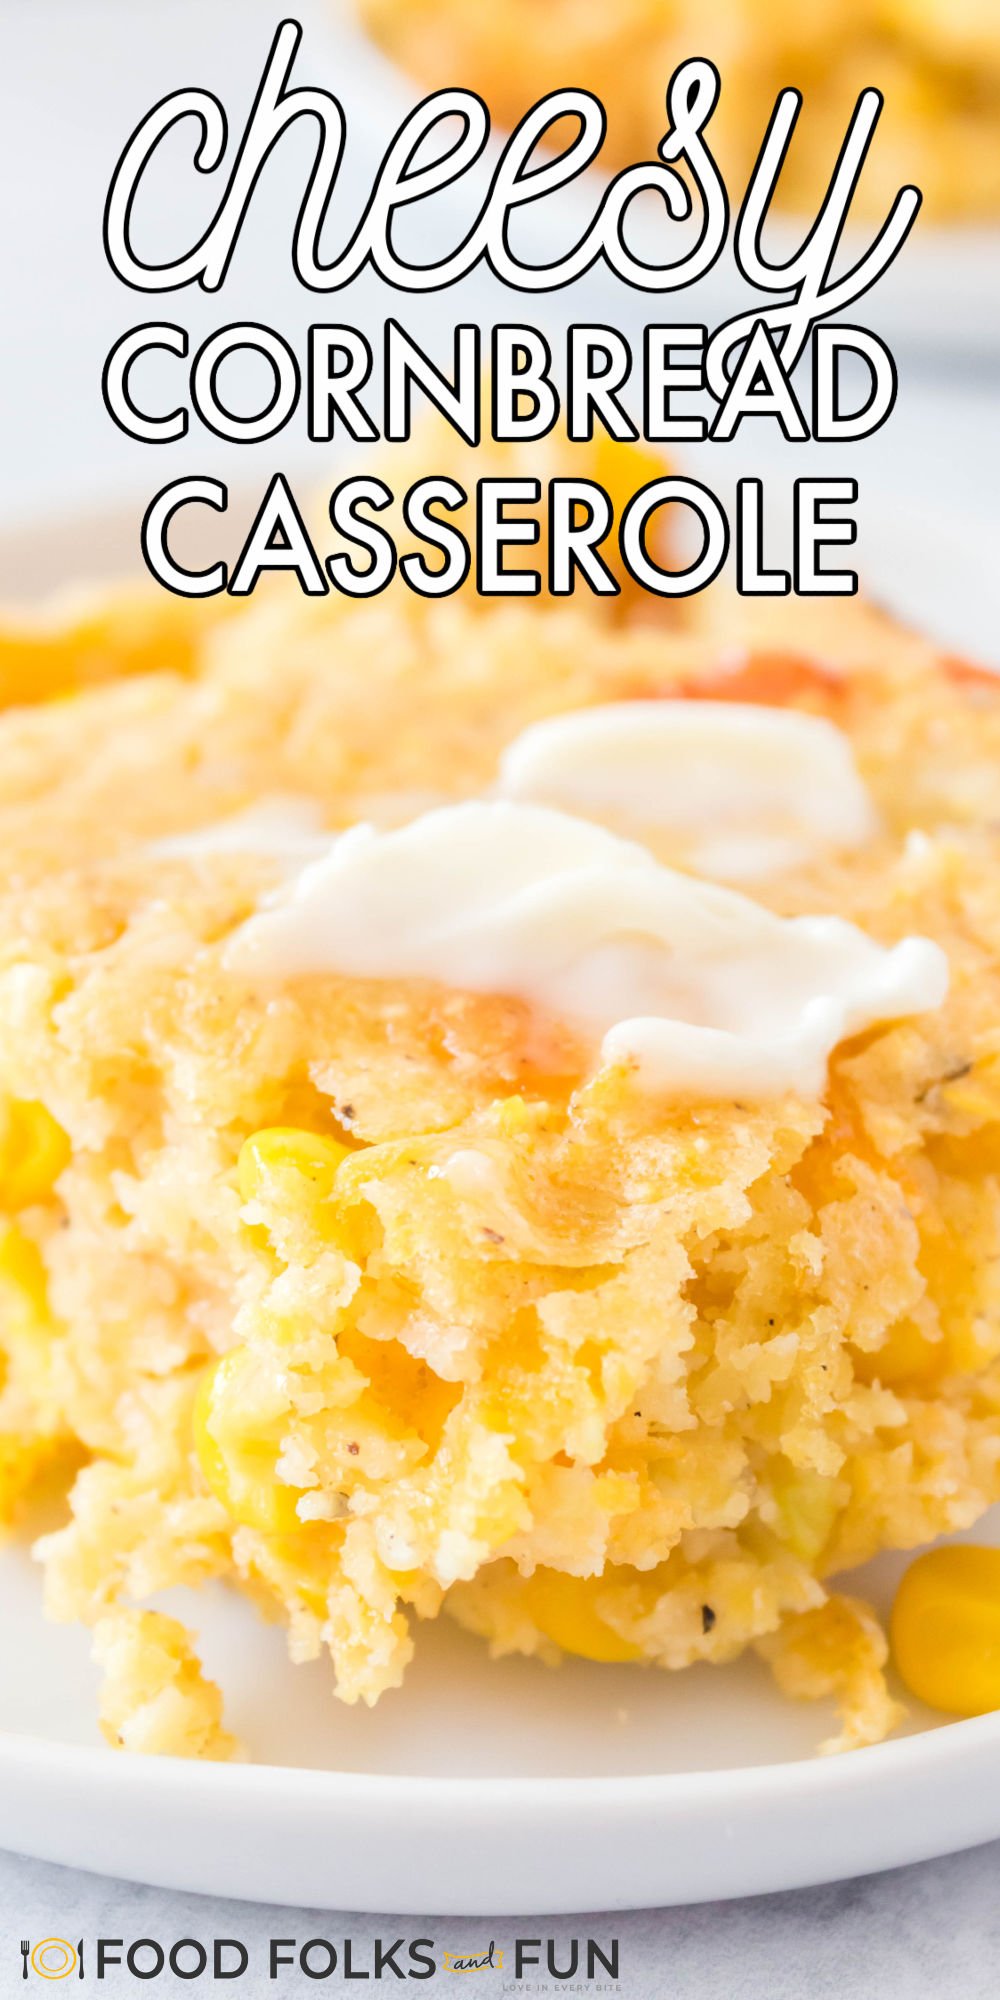 Easy Cornbread Casserole with Cheese is a comforting side dish for entertaining and busy weeknights! It's quick to whip together and so delicious! via @foodfolksandfun